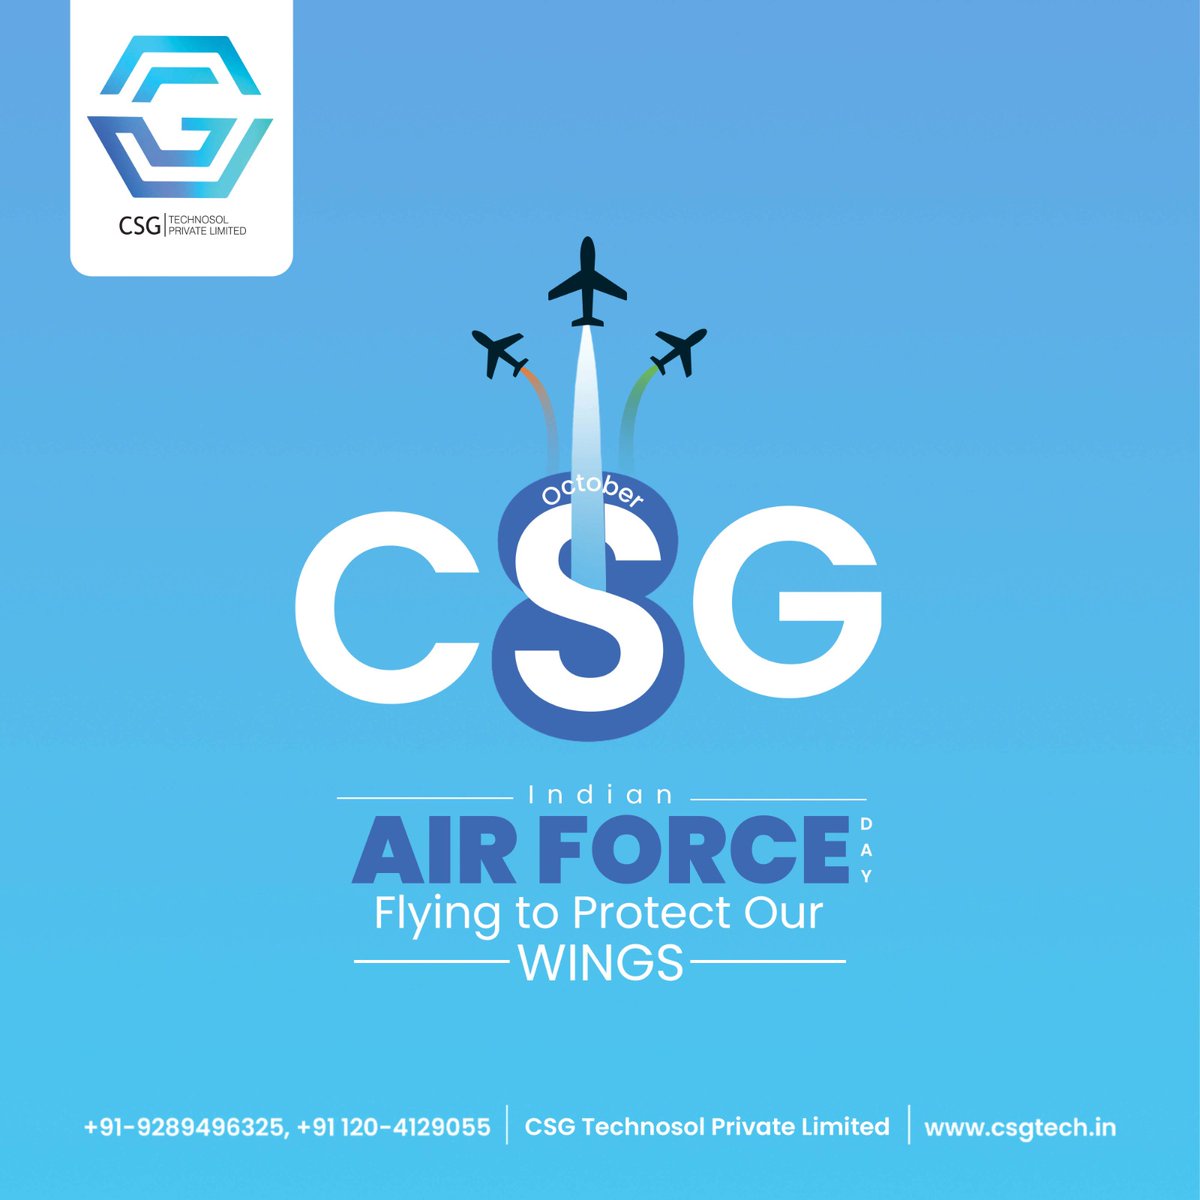 Protecting our #skies with #courage and #determination, the #IndianAirForce is our #pride and #glory. 
#IndianAirForceDay #csgTech #ITcompany #SoftwareDeveloper #crmDeveloper #erpDeveloper #PaymentGatewayDeveloper #ecommerceDeveloper #DigitalMarketing